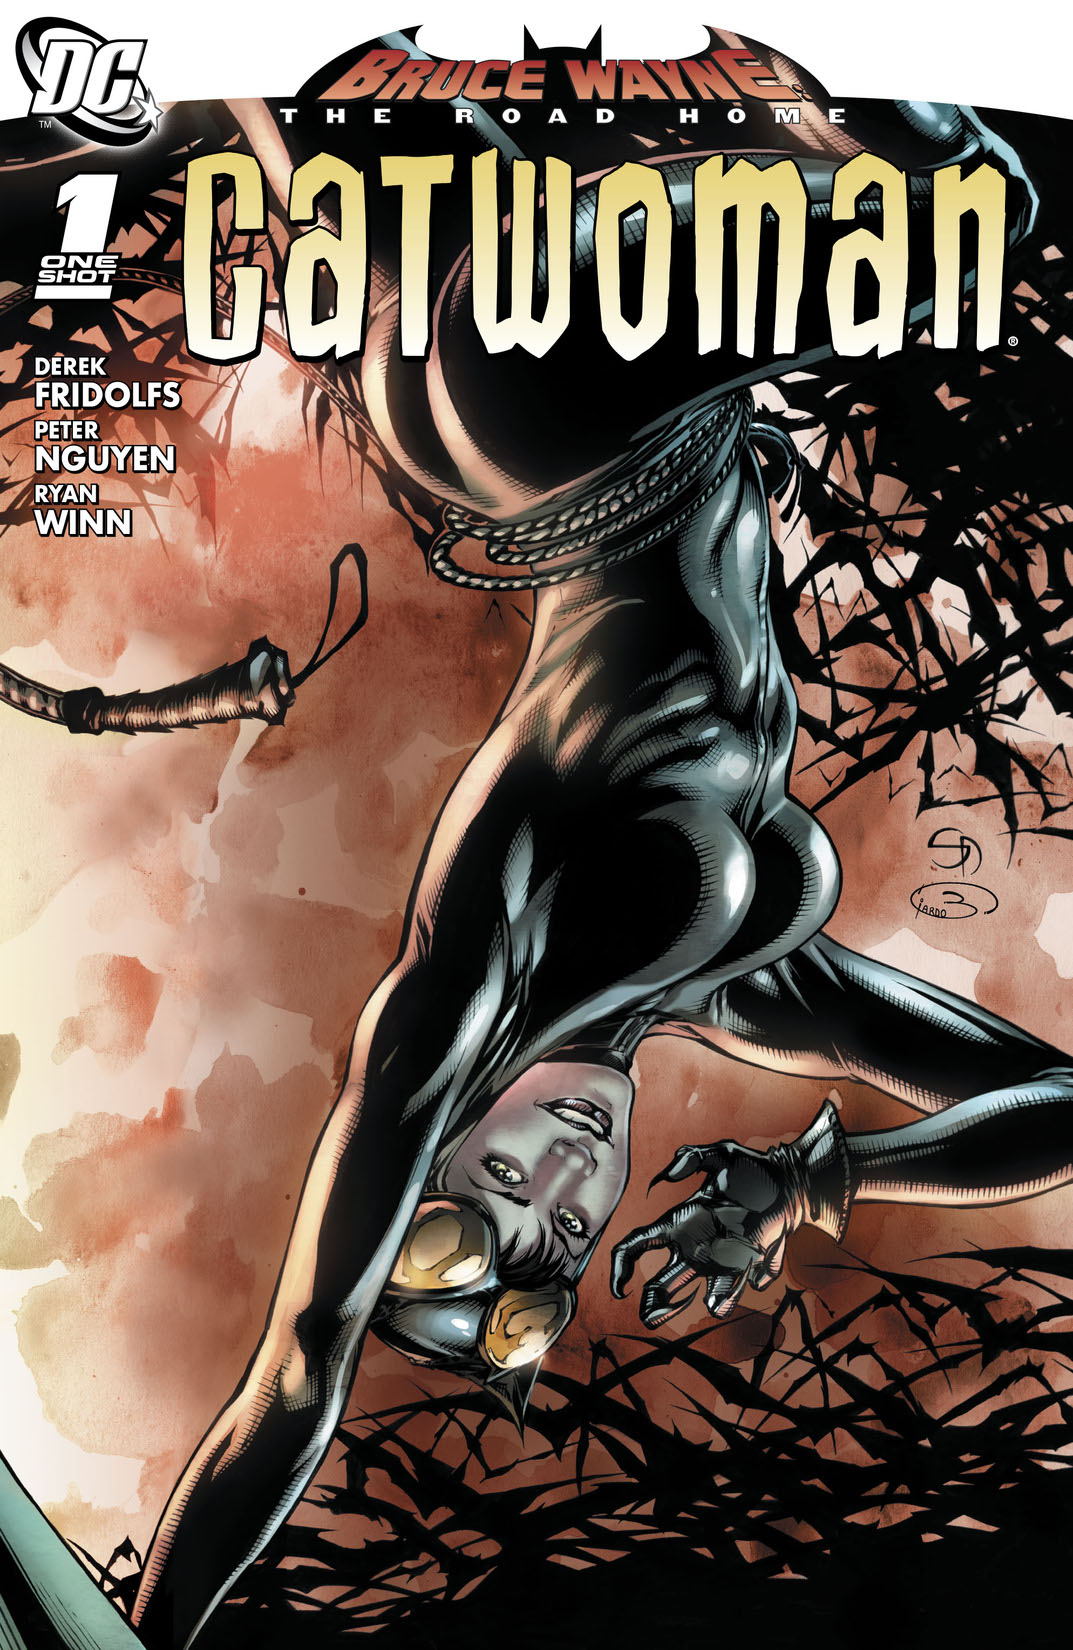 Bruce Wayne: The Road Home: Catwoman #1 preview images